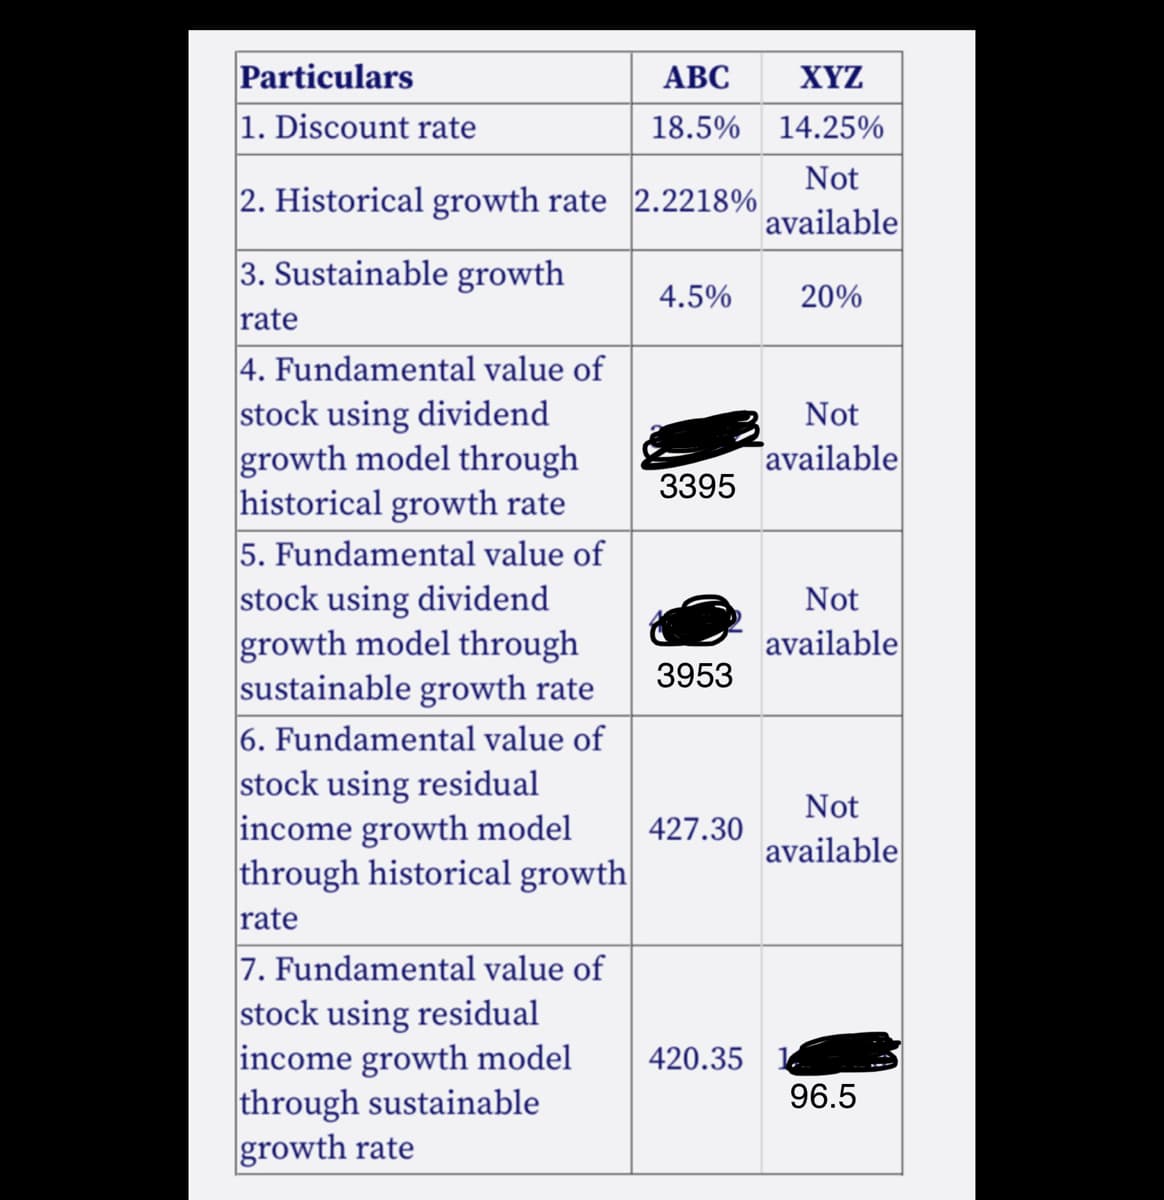 Particulars
1. Discount rate
АВС
XYZ
18.5%
14.25%
Not
2. Historical growth rate 2.2218%
available
3. Sustainable growth
4.5%
20%
rate
4. Fundamental value of
stock using dividend
growth model through
historical growth rate
5. Fundamental value of
stock using dividend
growth model through
sustainable growth rate
6. Fundamental value of
stock using residual
income growth model
through historical growth
rate
7. Fundamental value of
stock using residual
income growth model
through sustainable
growth rate
Not
Tavailable
3395
Not
available
3953
Not
427.30
available
420.35 1
96.5
